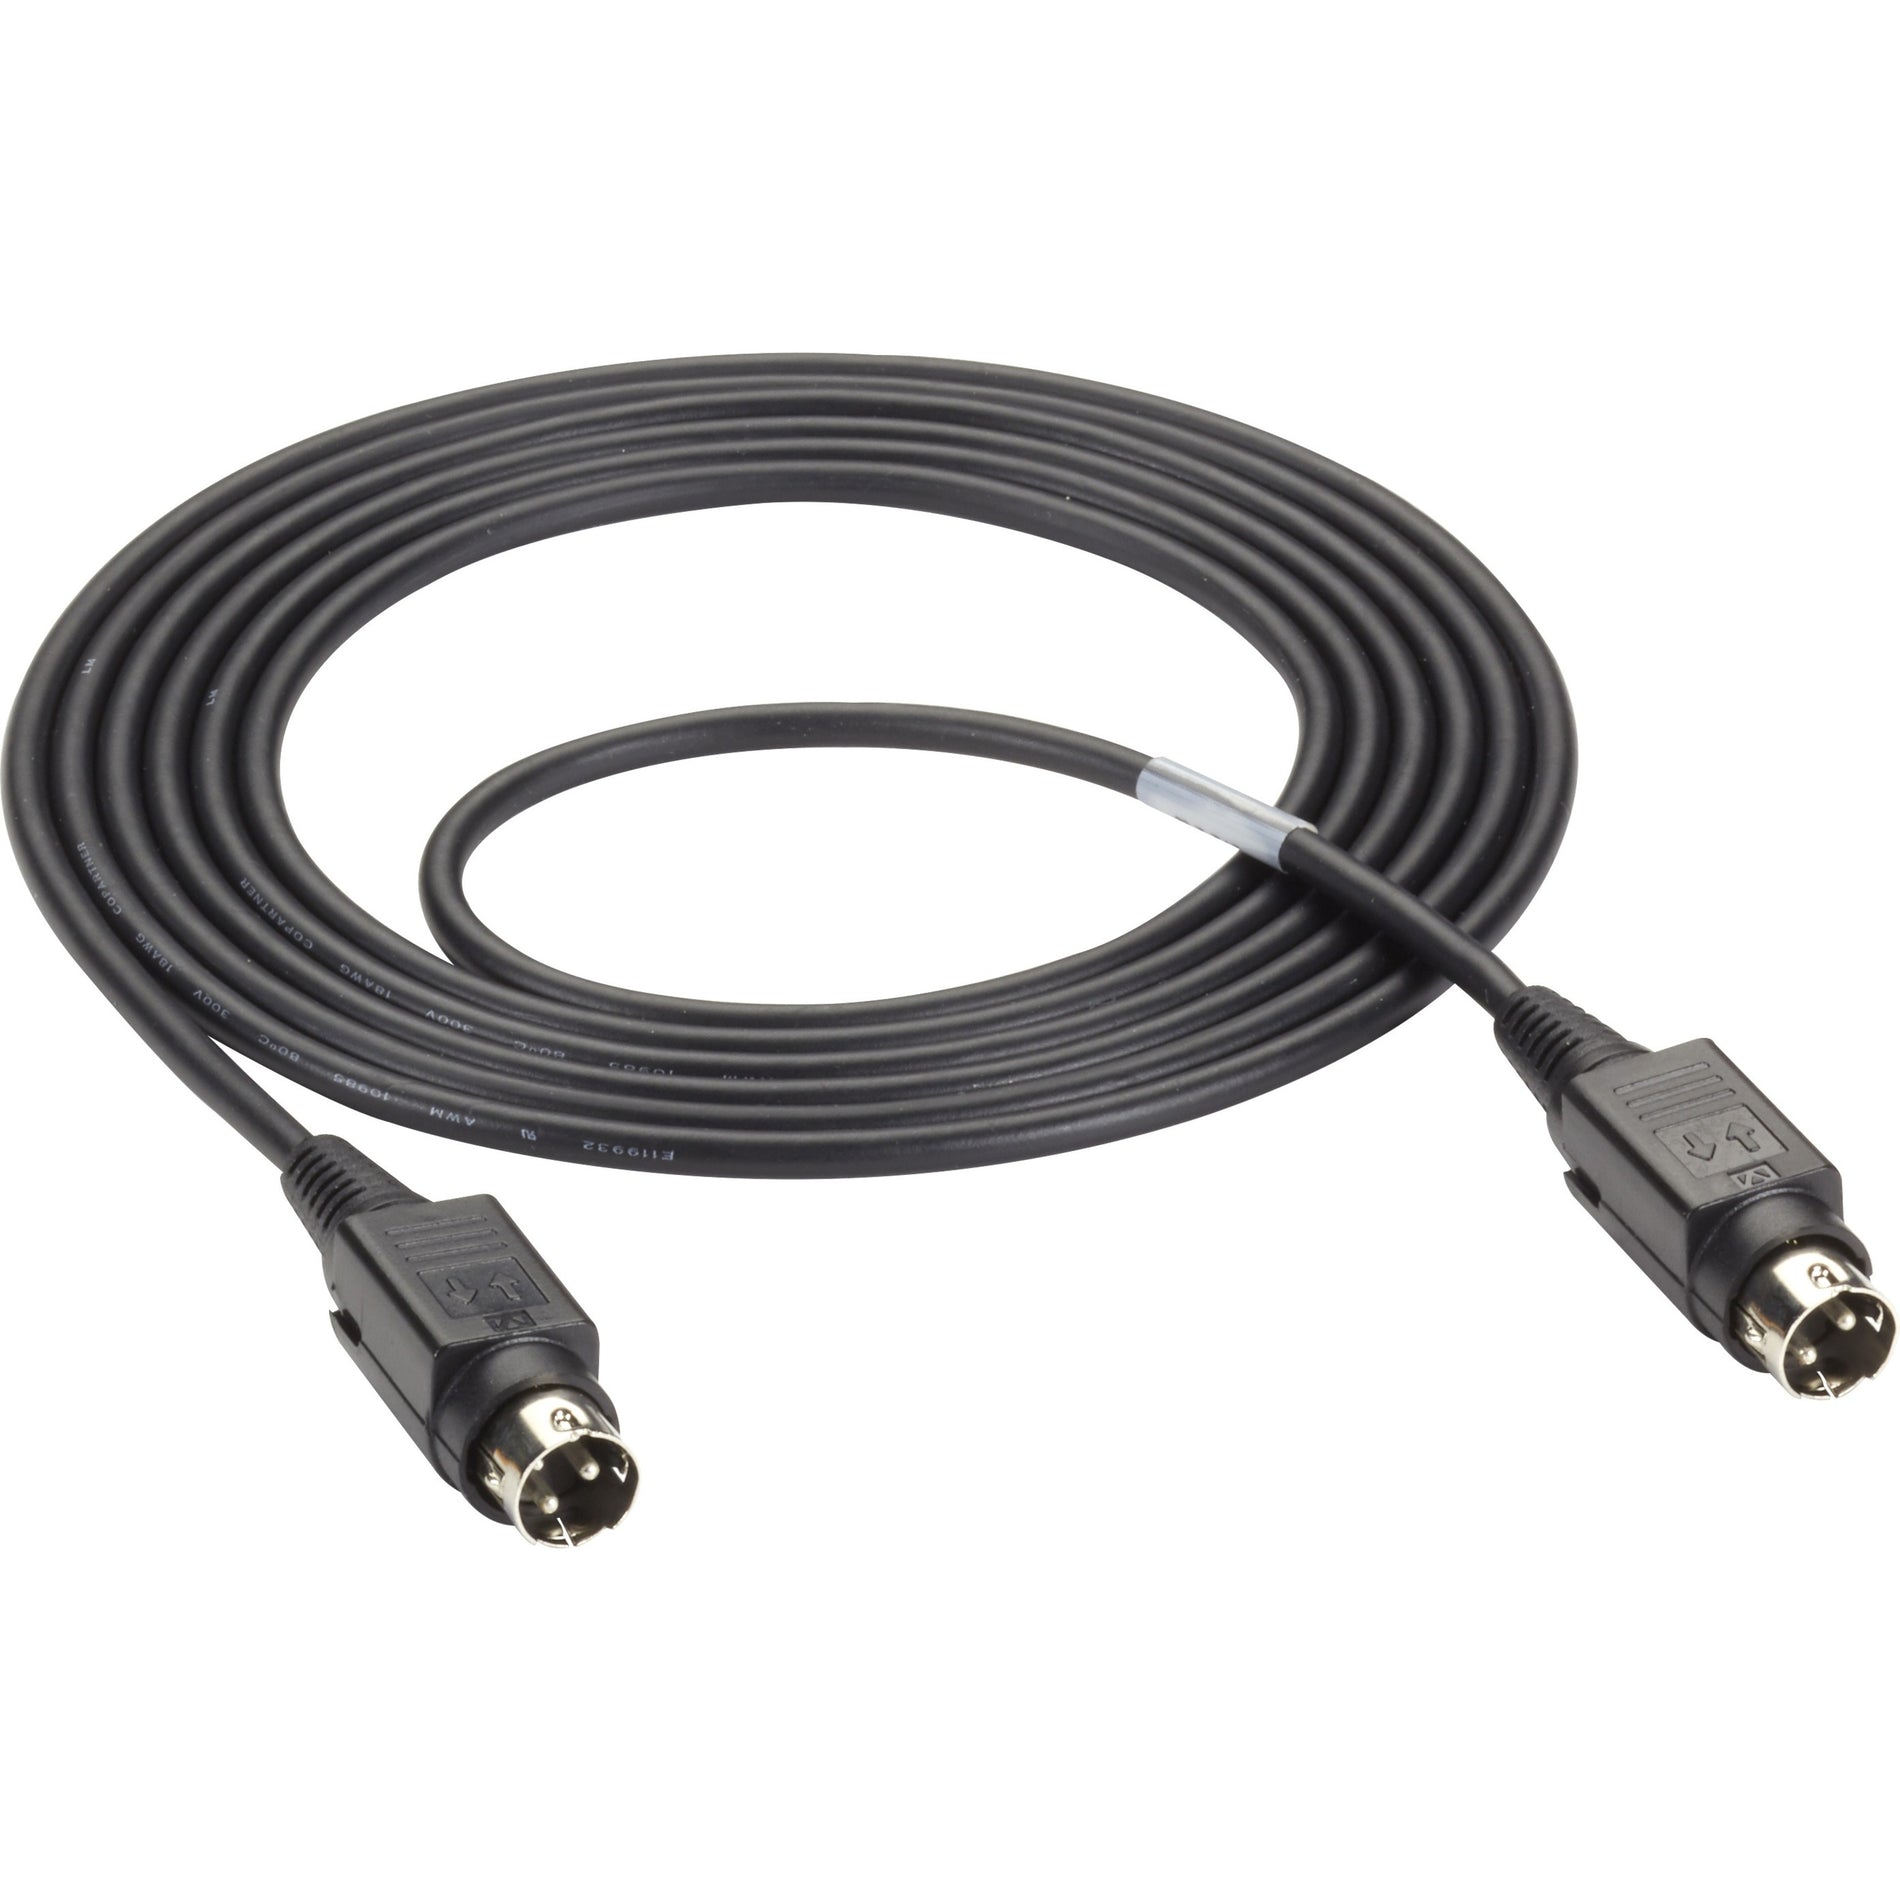 Black Box ACR1000-3PL-CBL2M Adapter Cord, 2 Year Limited Warranty, 12V DC Voltage Rating